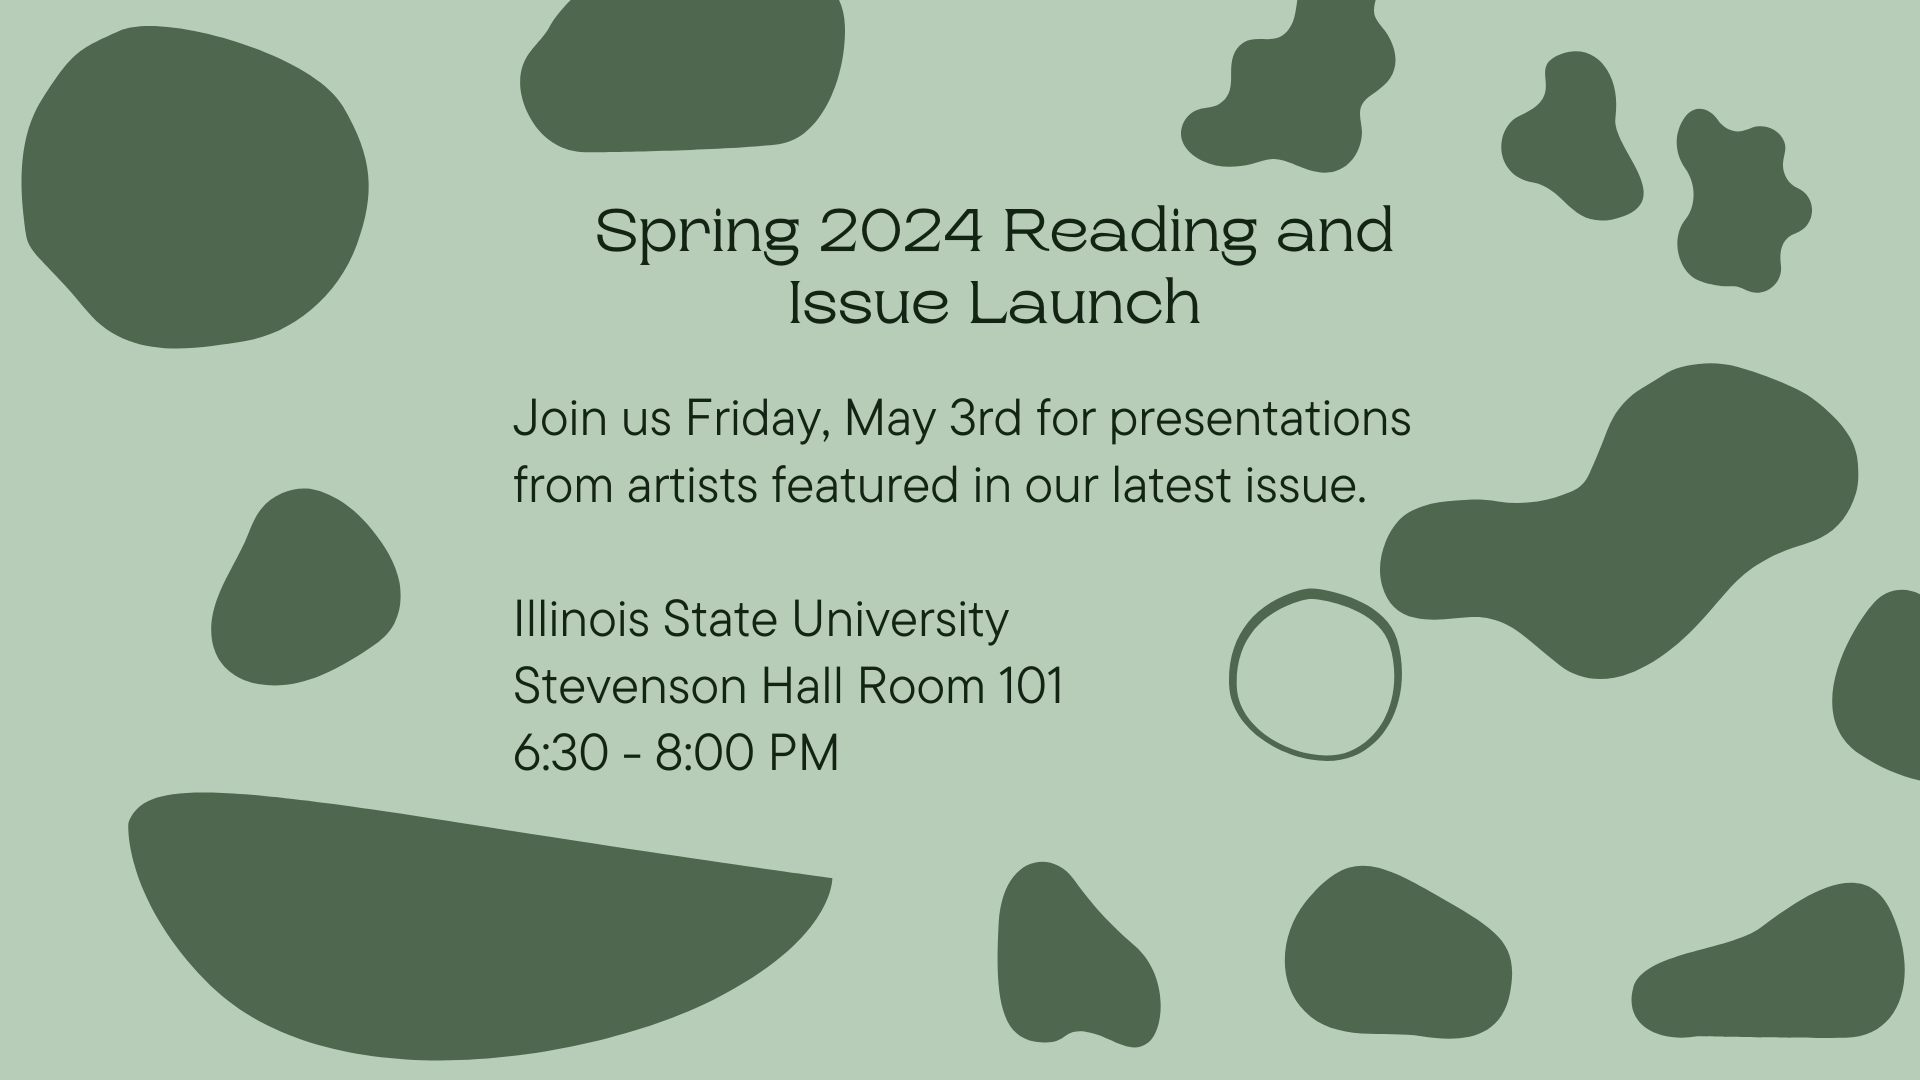 Spring 2024 Reading and Issue Launch. Join us Friday, May 3rd for presentations from artists featured in our latest issue. Illinois State University, Stevenson Hall Room 101, 6:30 - 8:00 PM